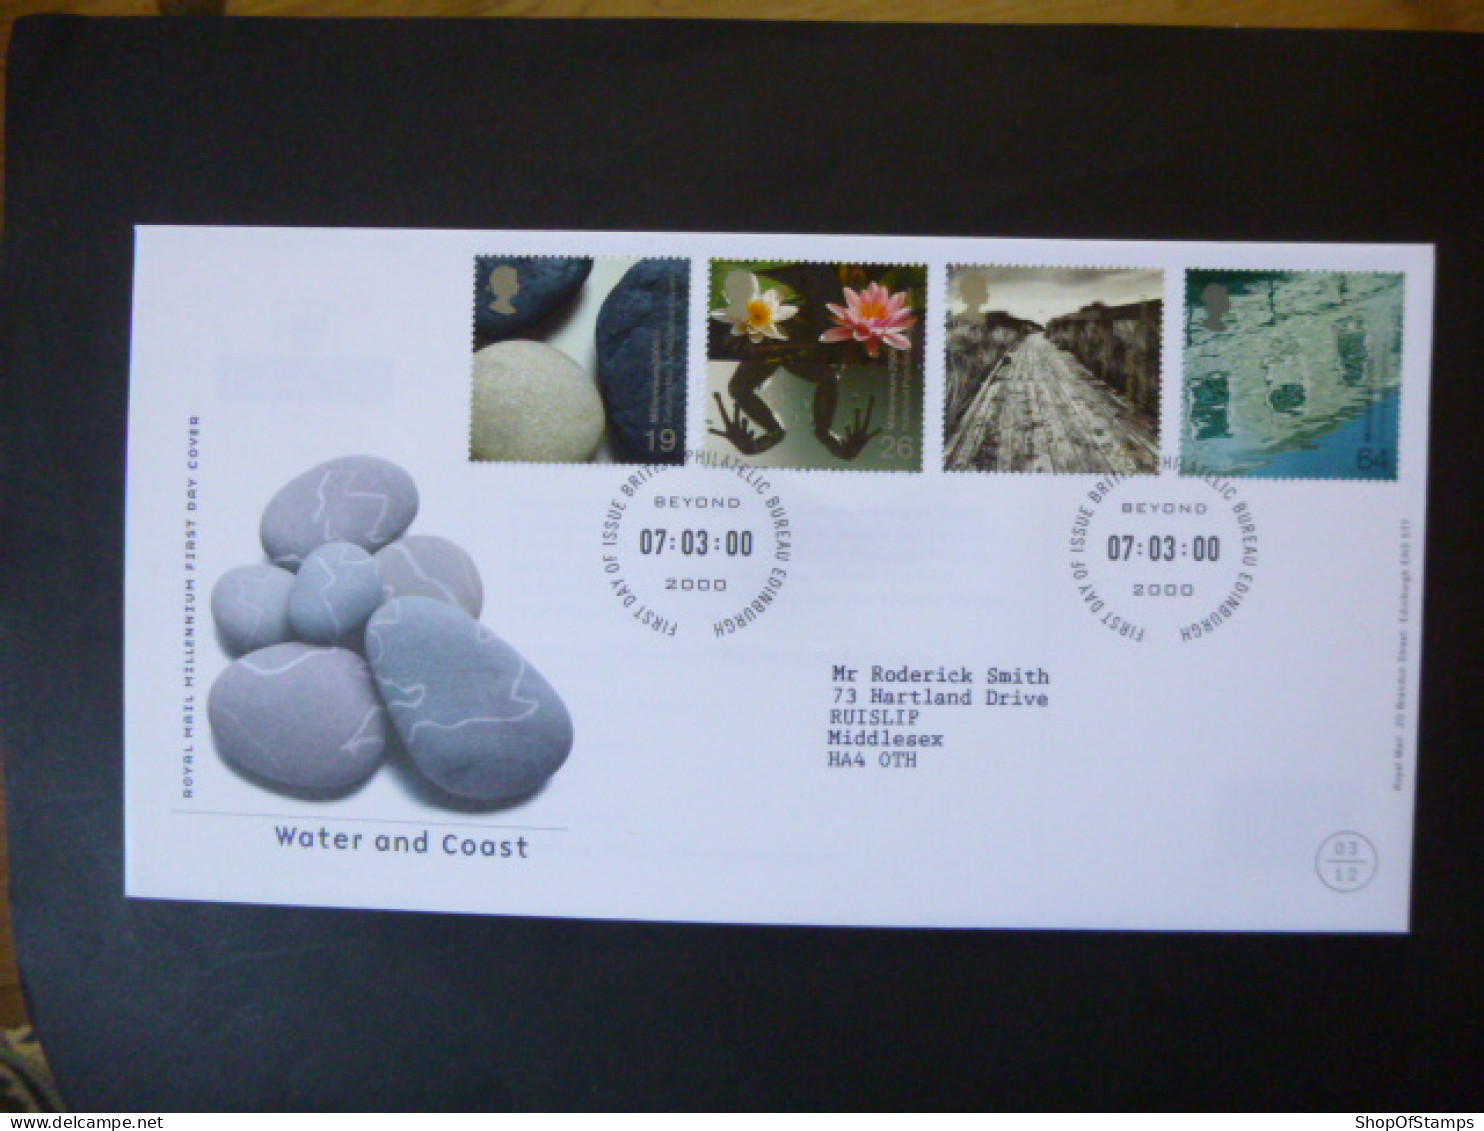 GREAT BRITAIN SG 2134-37 MILLENIUM PROJECTS WATER AND COAST FDC EDINBURGH - Unclassified